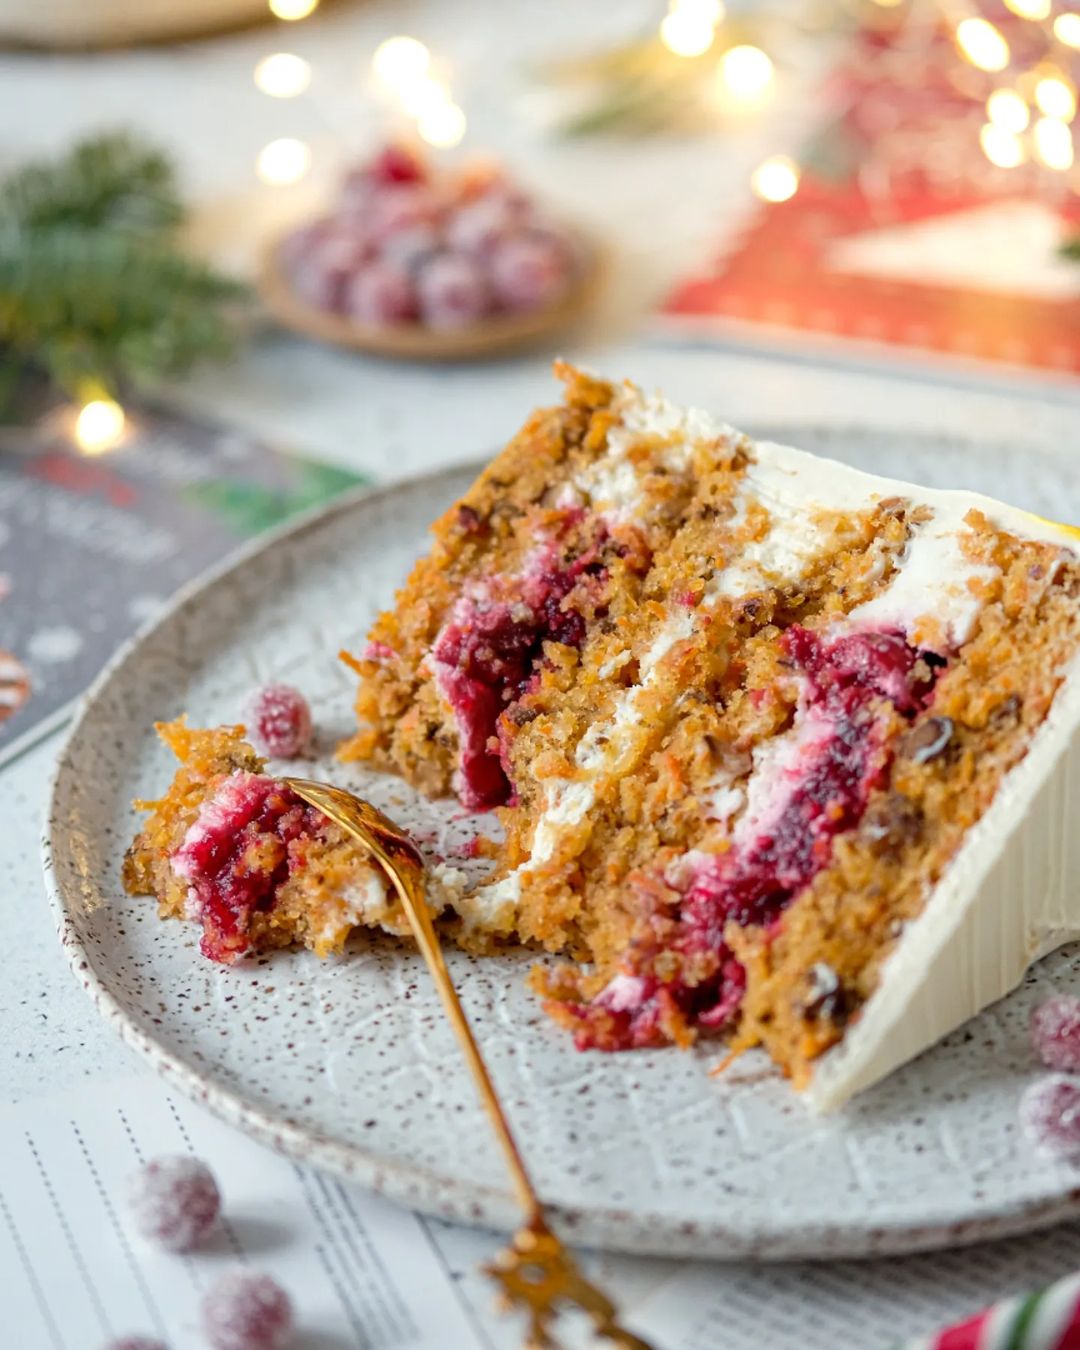 Carrot cake with cherry filling